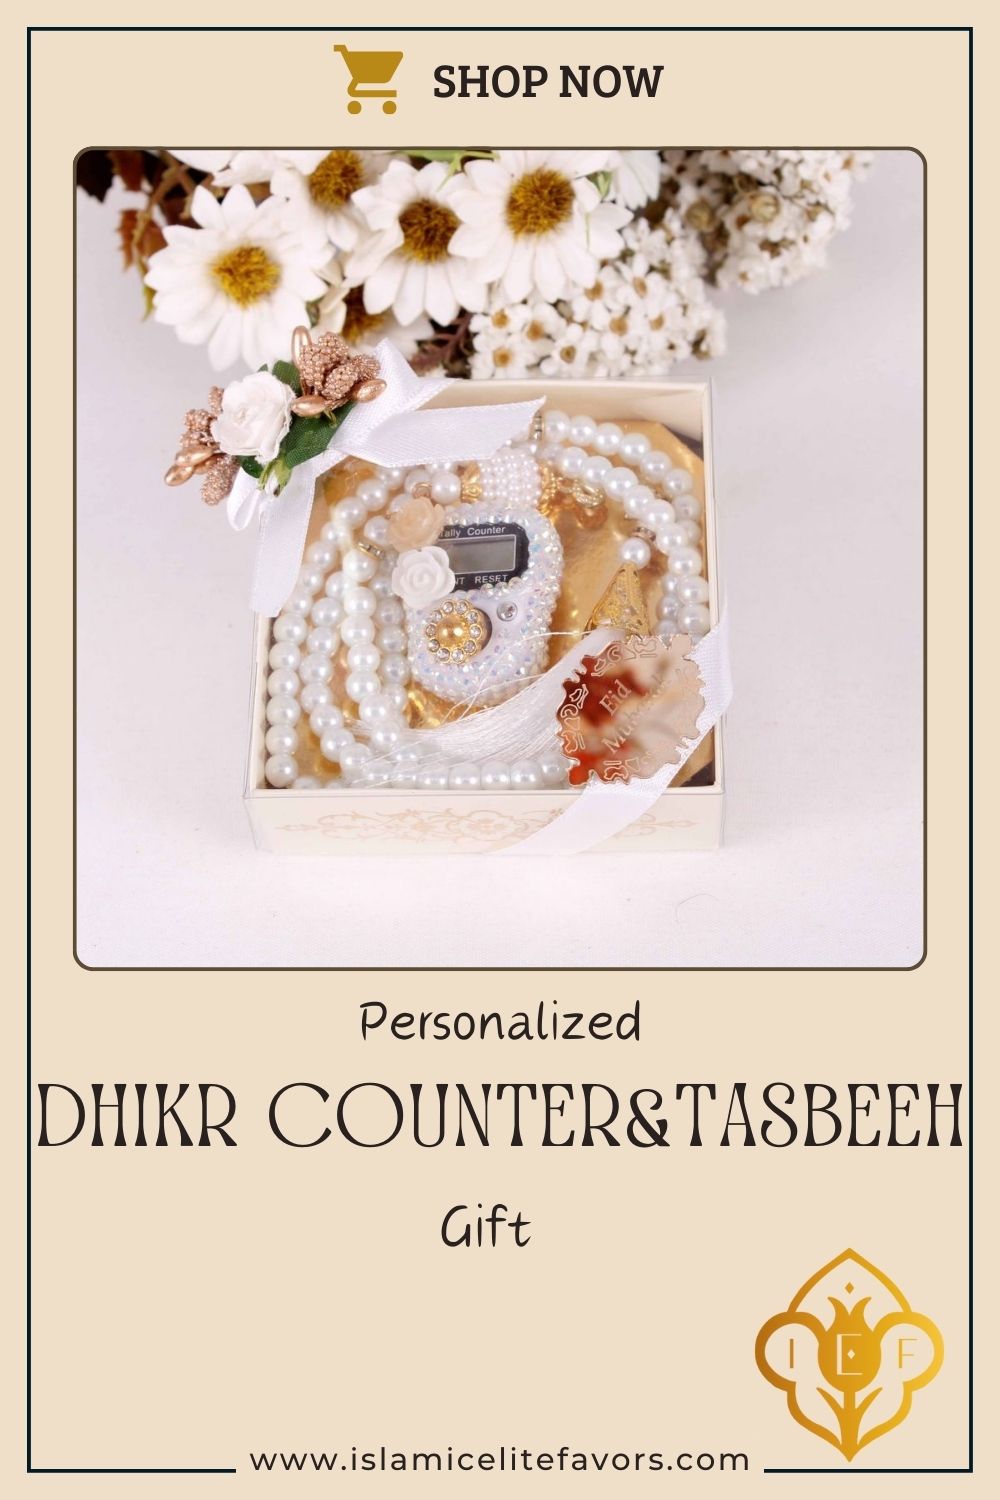 Personalized Dhikr Counter Pearl Prayer Beads Islamic Wedding Favor - Islamic Elite Favors is a handmade gift shop offering a wide variety of unique and personalized gifts for all occasions. Whether you're looking for the perfect Ramadan, Eid, Hajj, wedding gift or something special for a birthday, baby shower or anniversary, we have something for everyone. High quality, made with love.